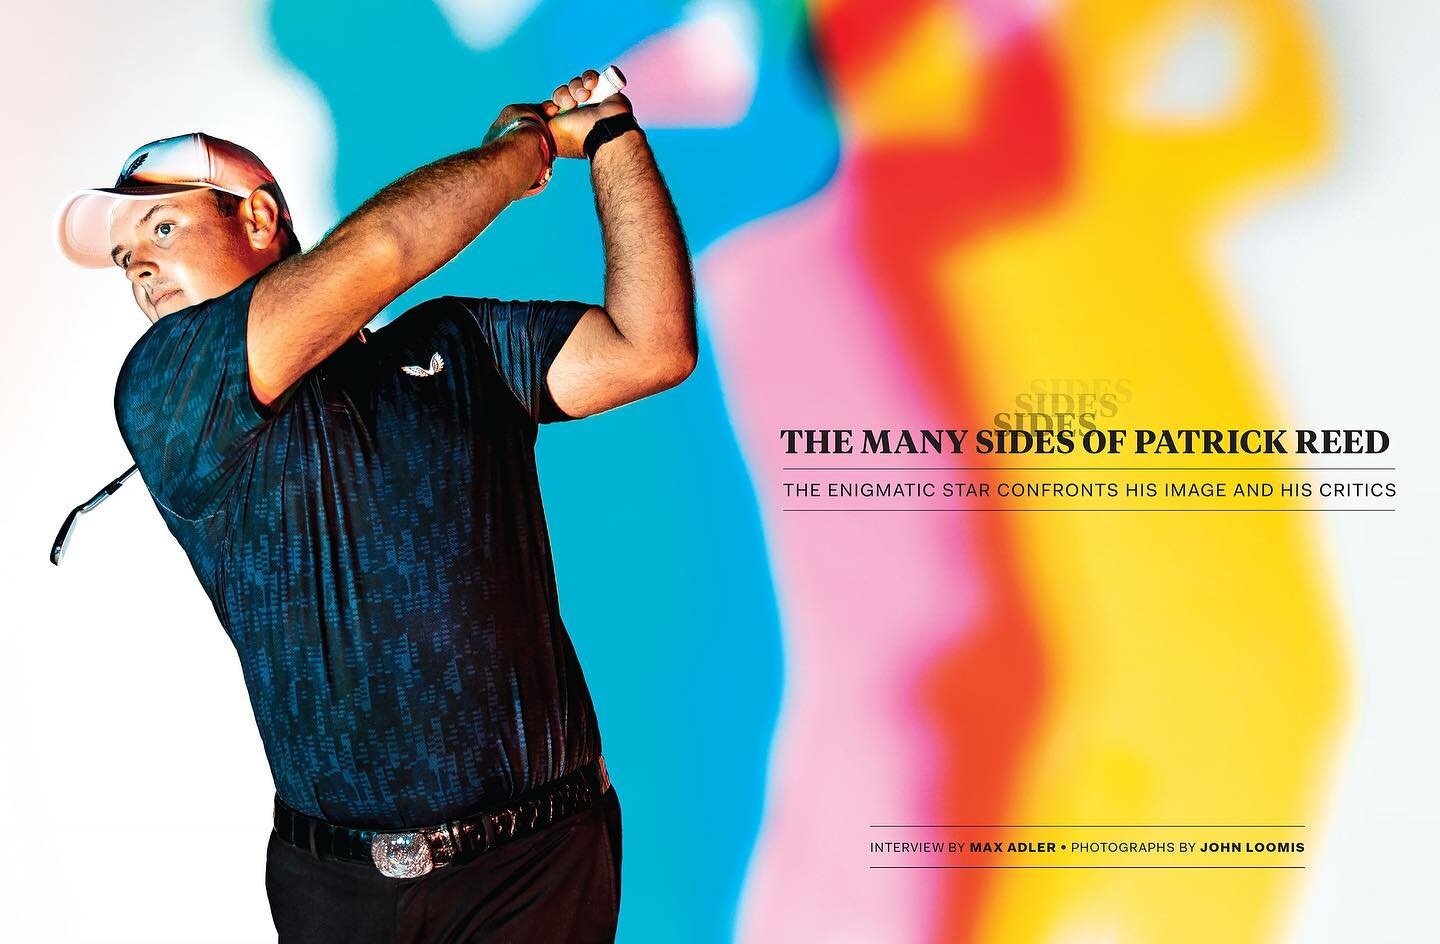 Here is one last beautifully designed spread by @schlizam from my cover shoot of @preedgolf in the May issue of @golfdigest out now. Good luck to Patrick and all of the pros battling at Kiawah this weekend.
.
.
.
.
#johnloomis #photography #commercia